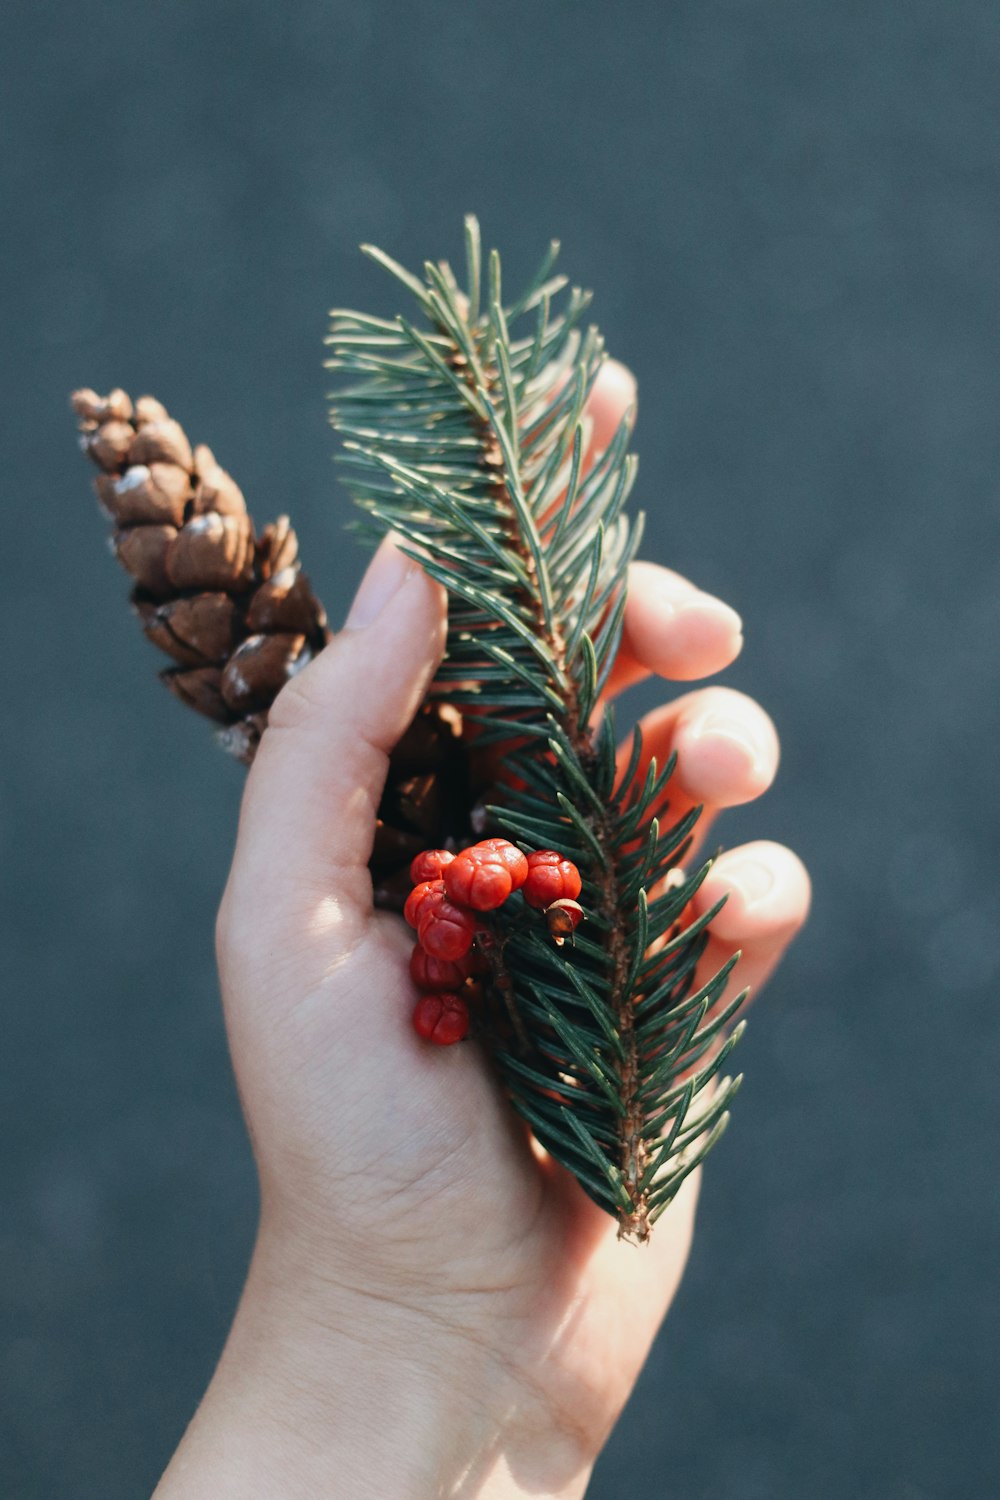 person holding brown pine cone with red round fruits